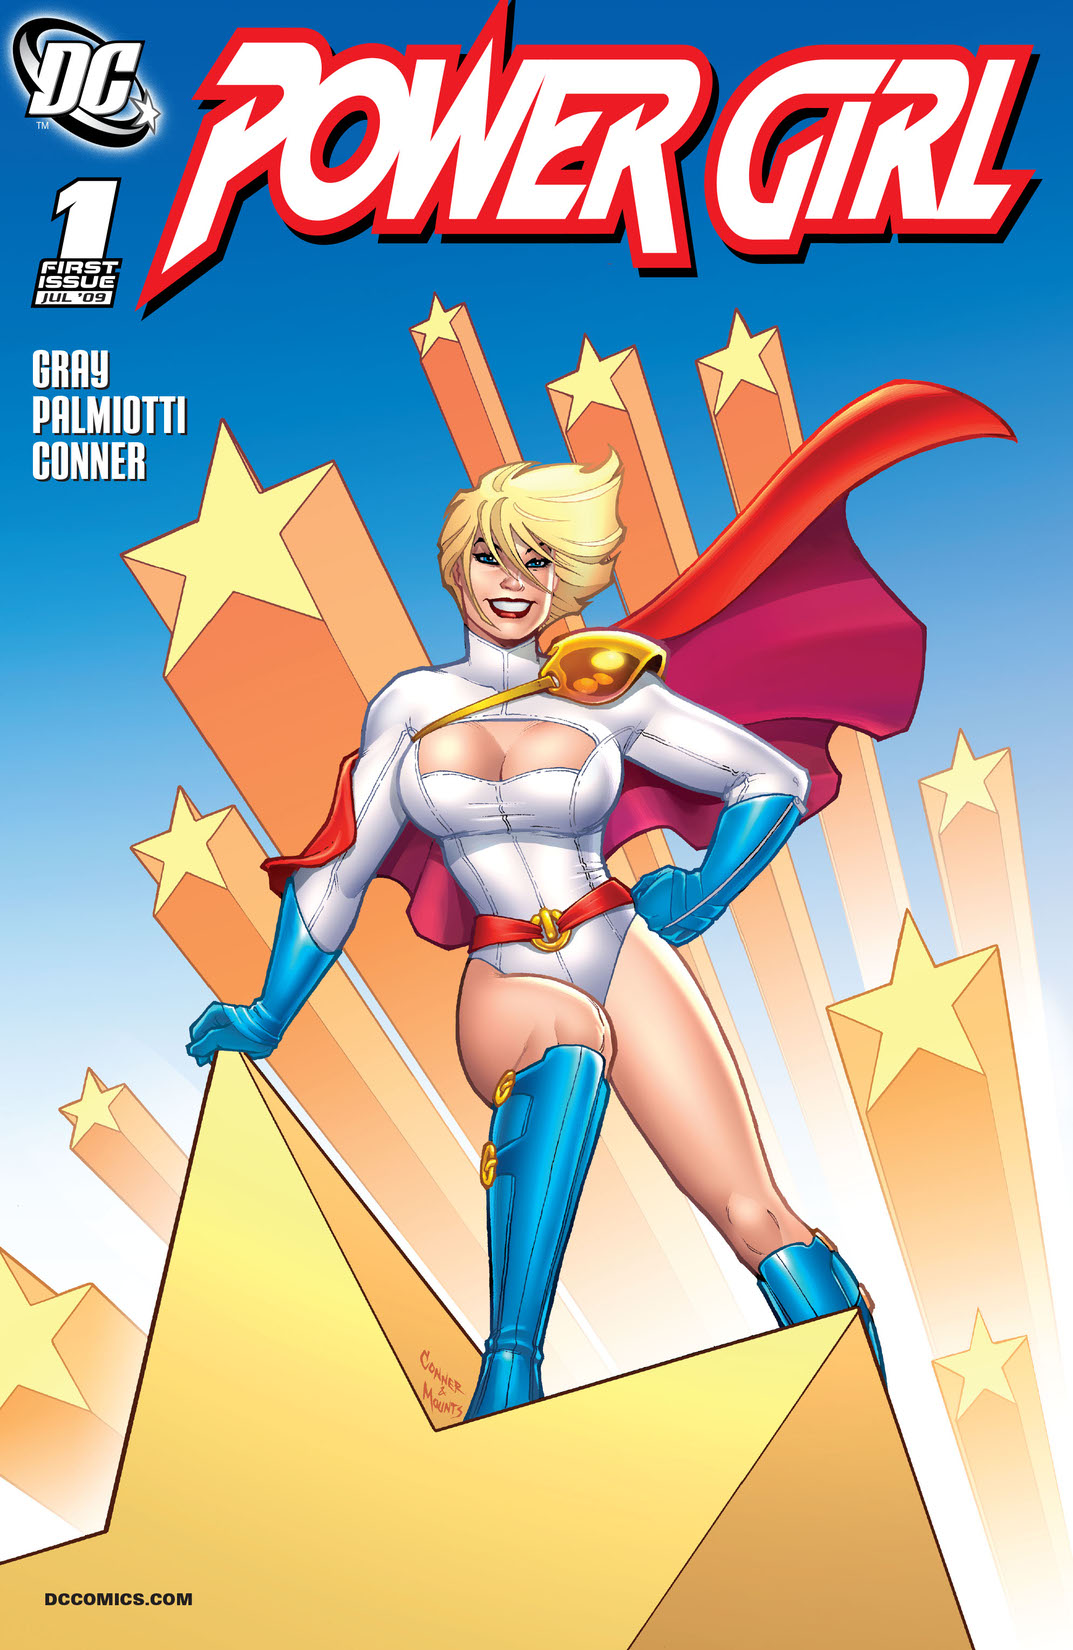 Power Girl (2009-) #1 preview images